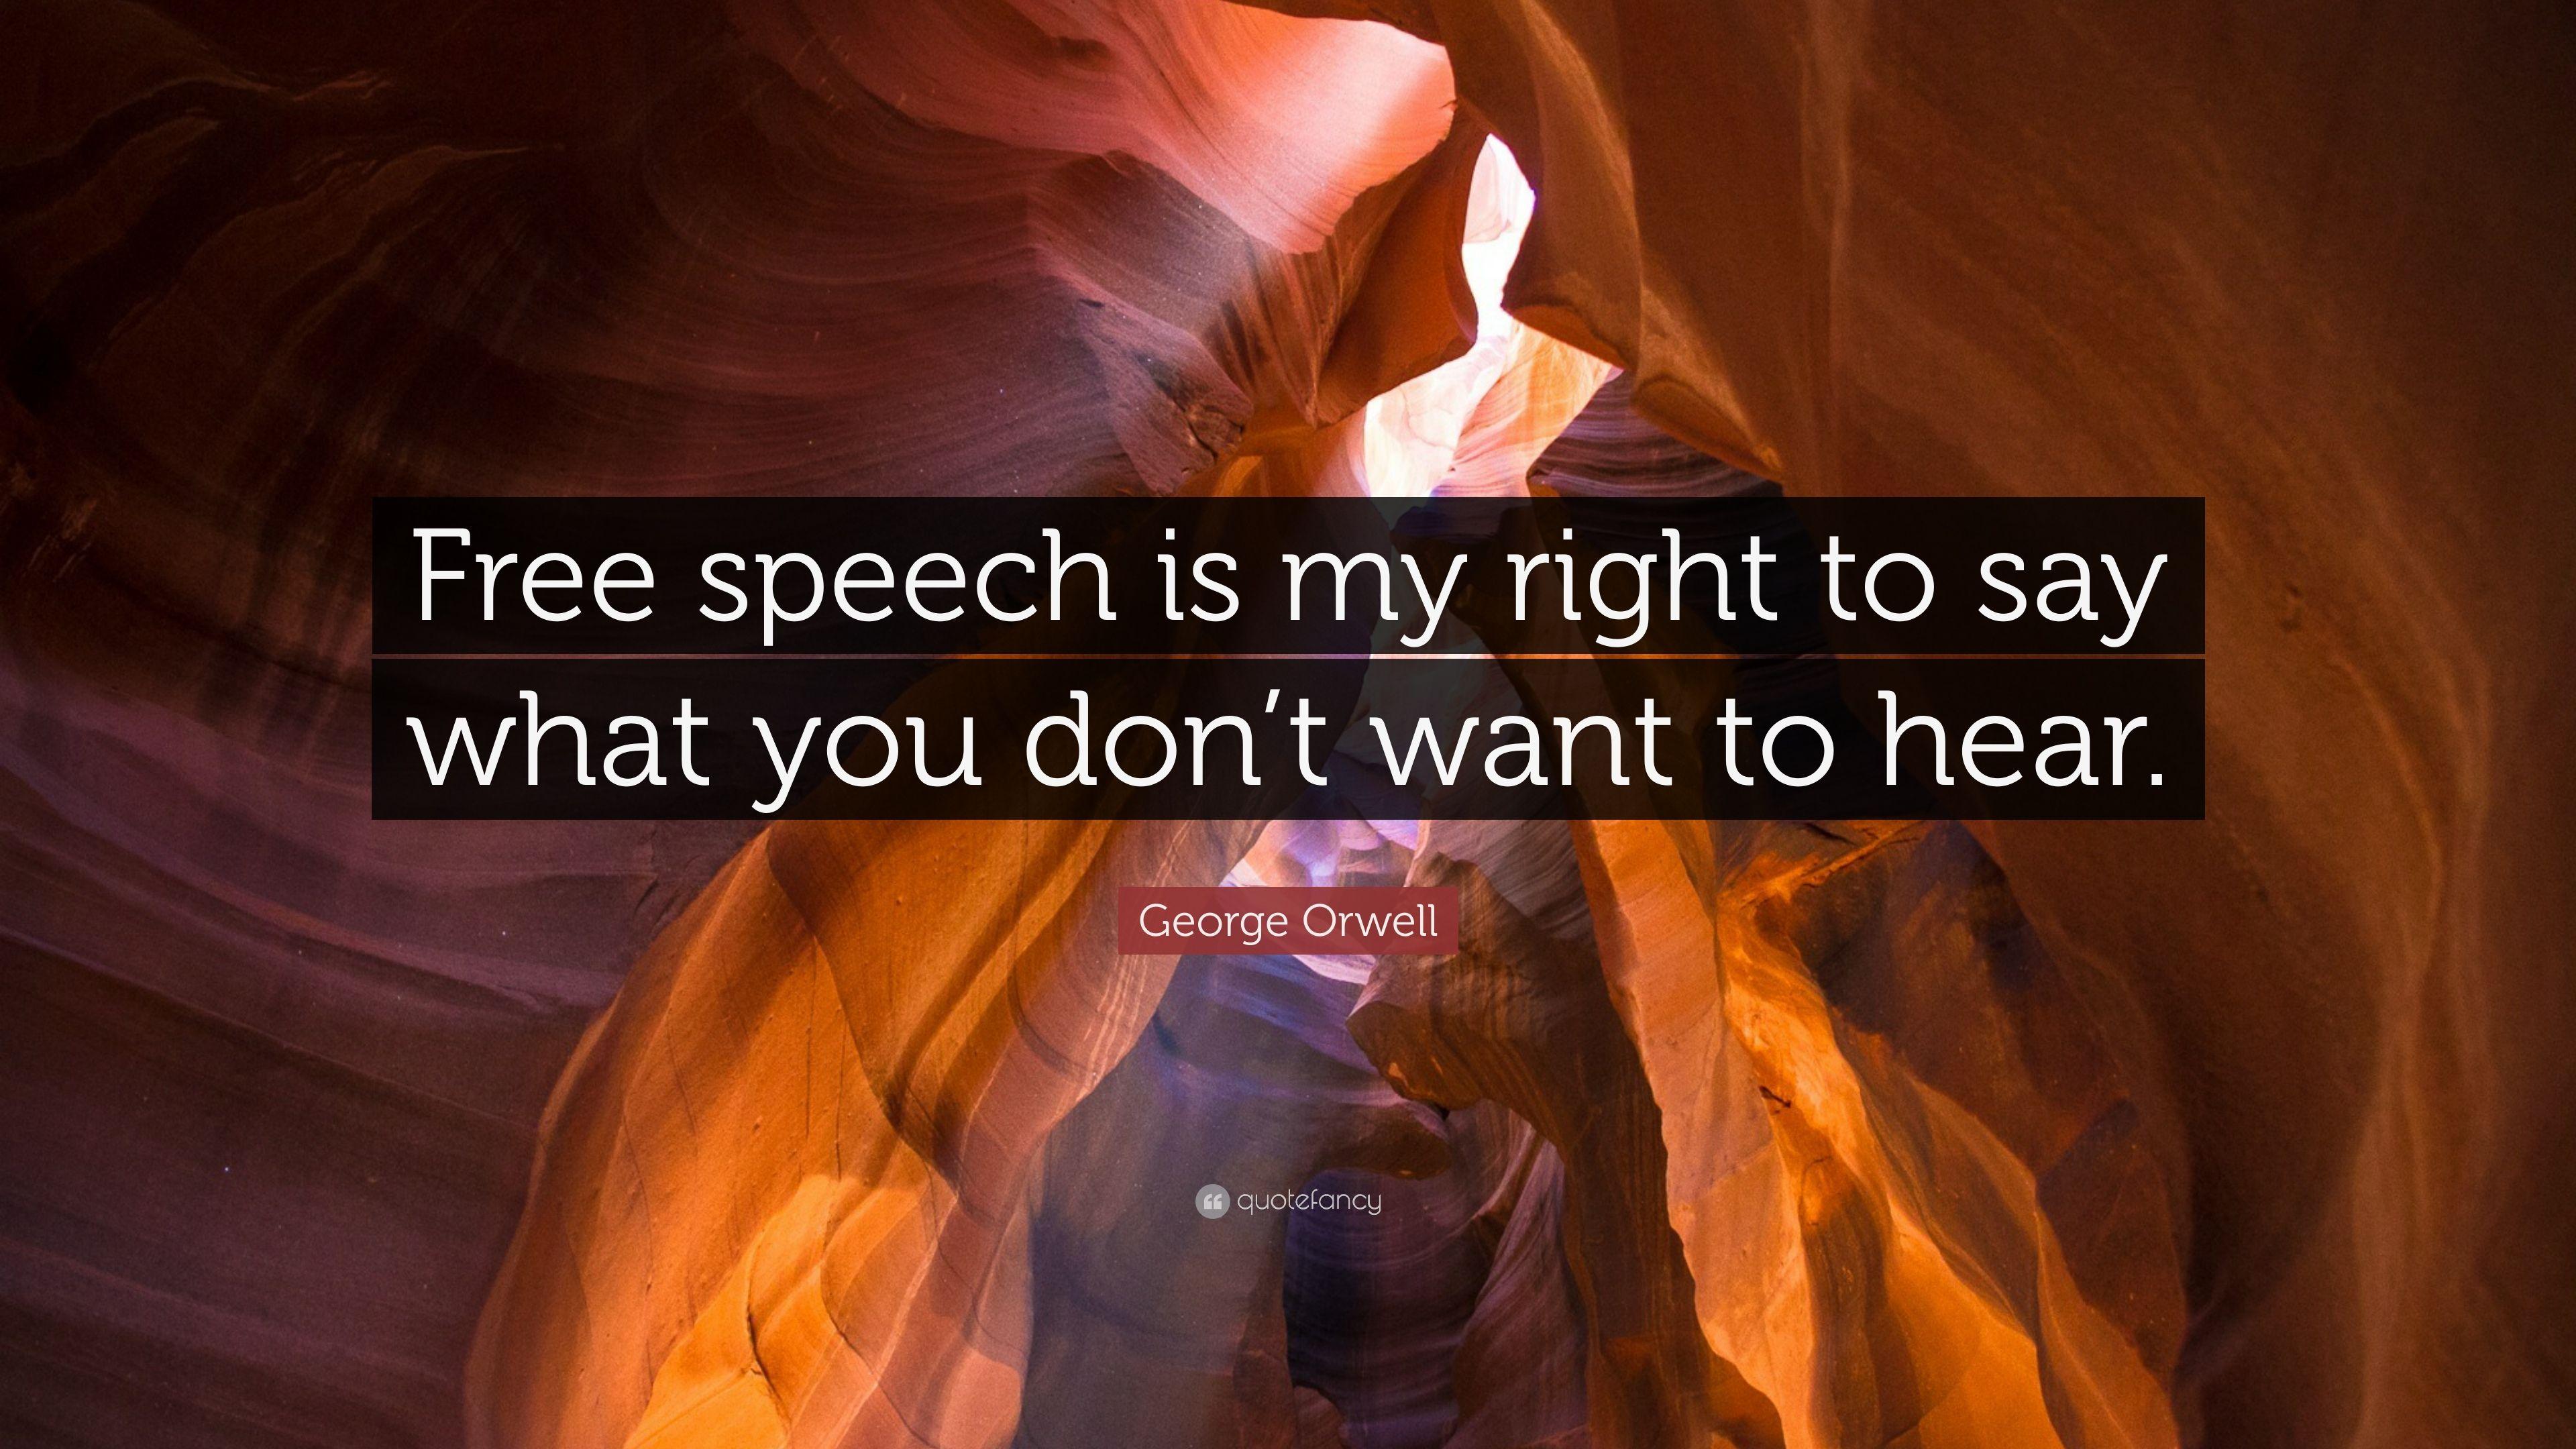 George Orwell Quote: “Free speech is my right to say what you don